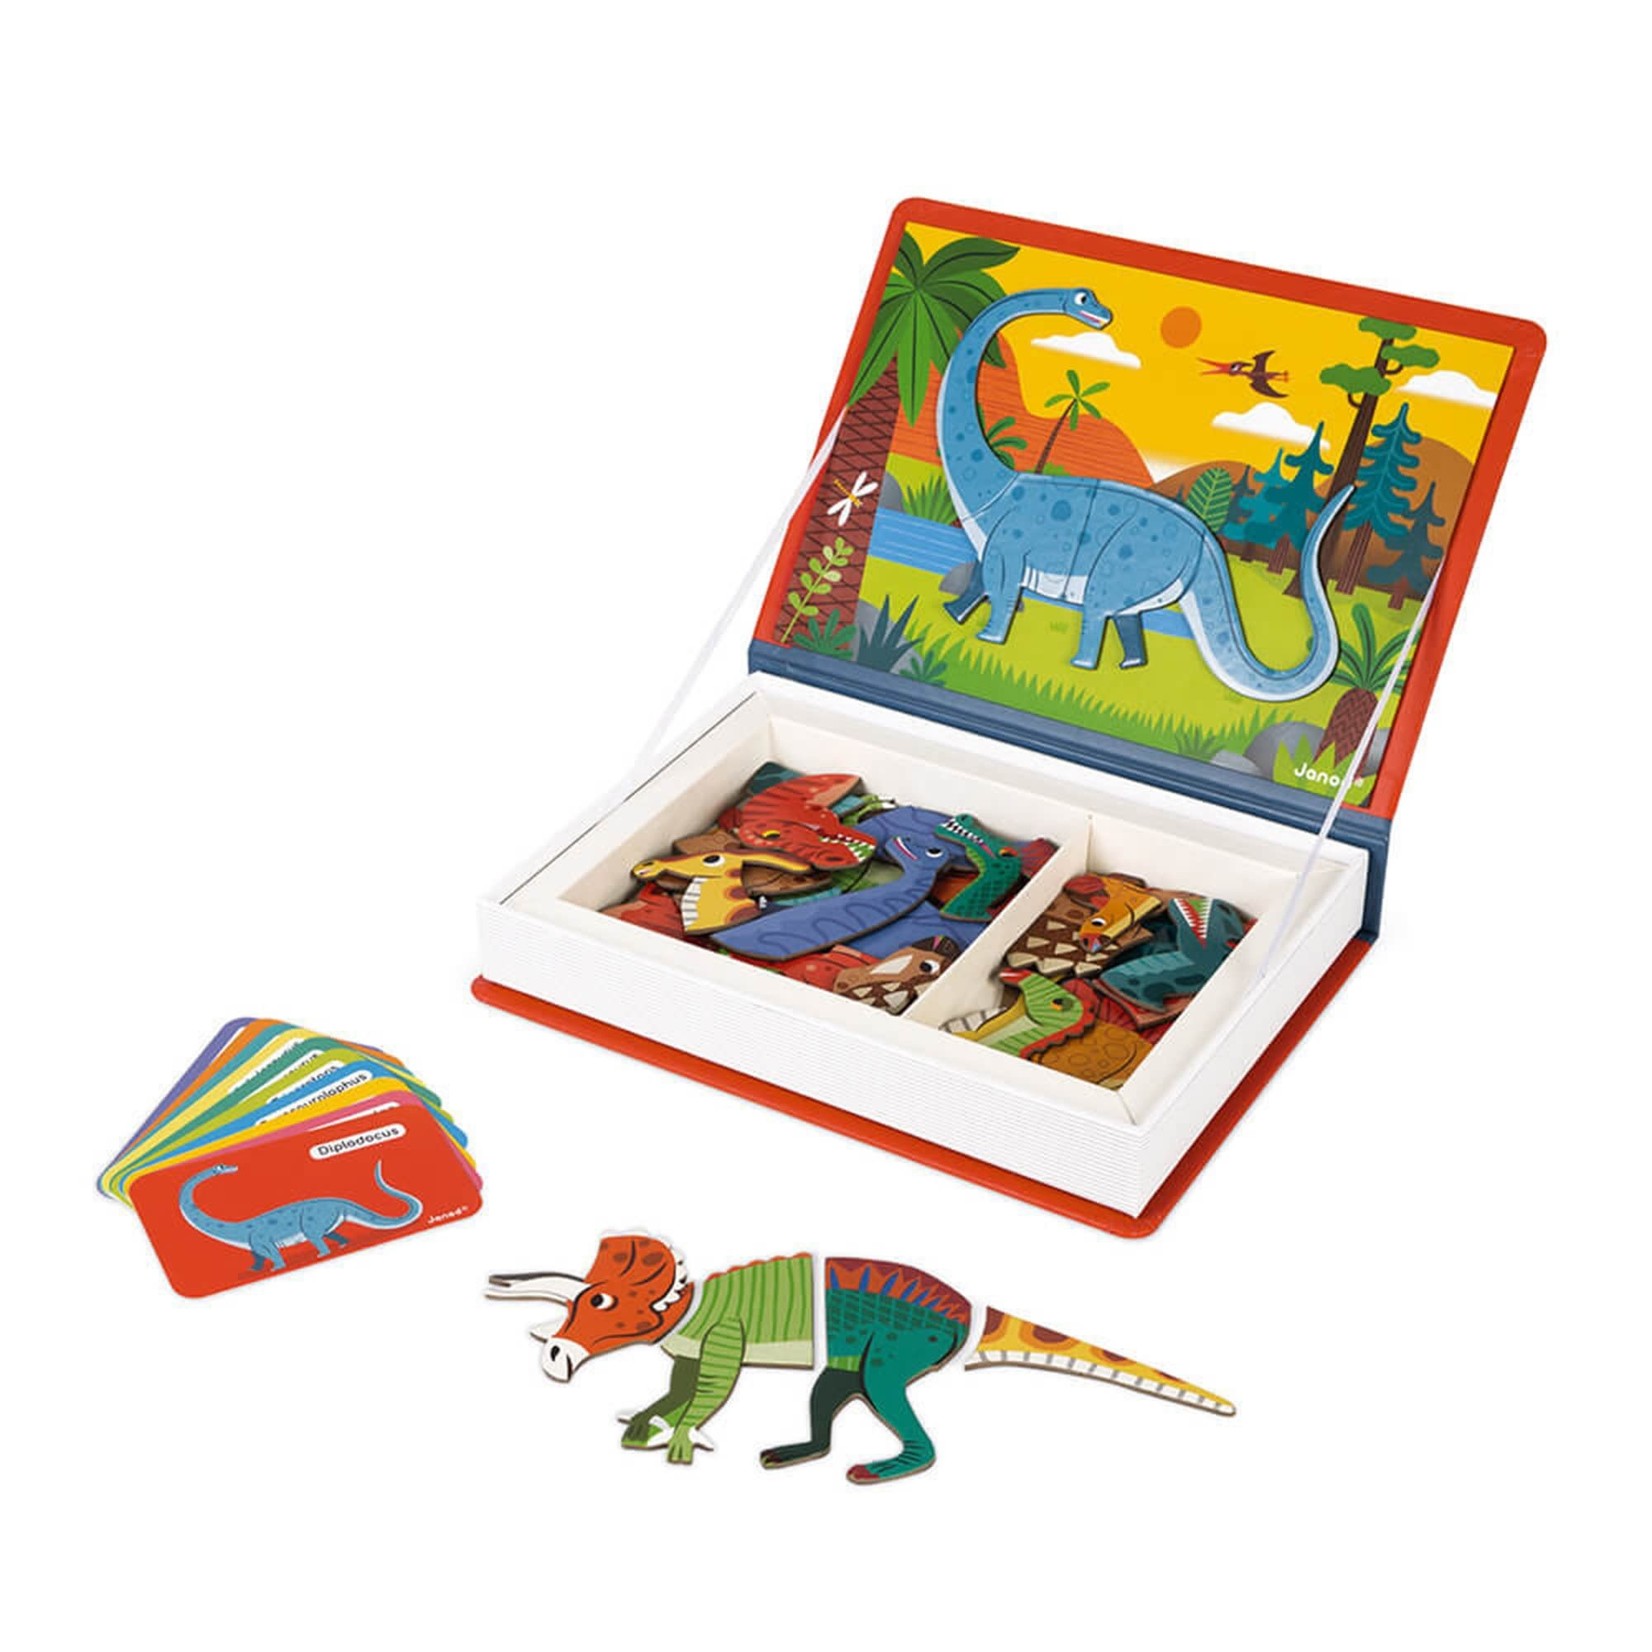 Janod JANOD - Dinosaurs Magneti'book - 40 Magnets / 10 Cards